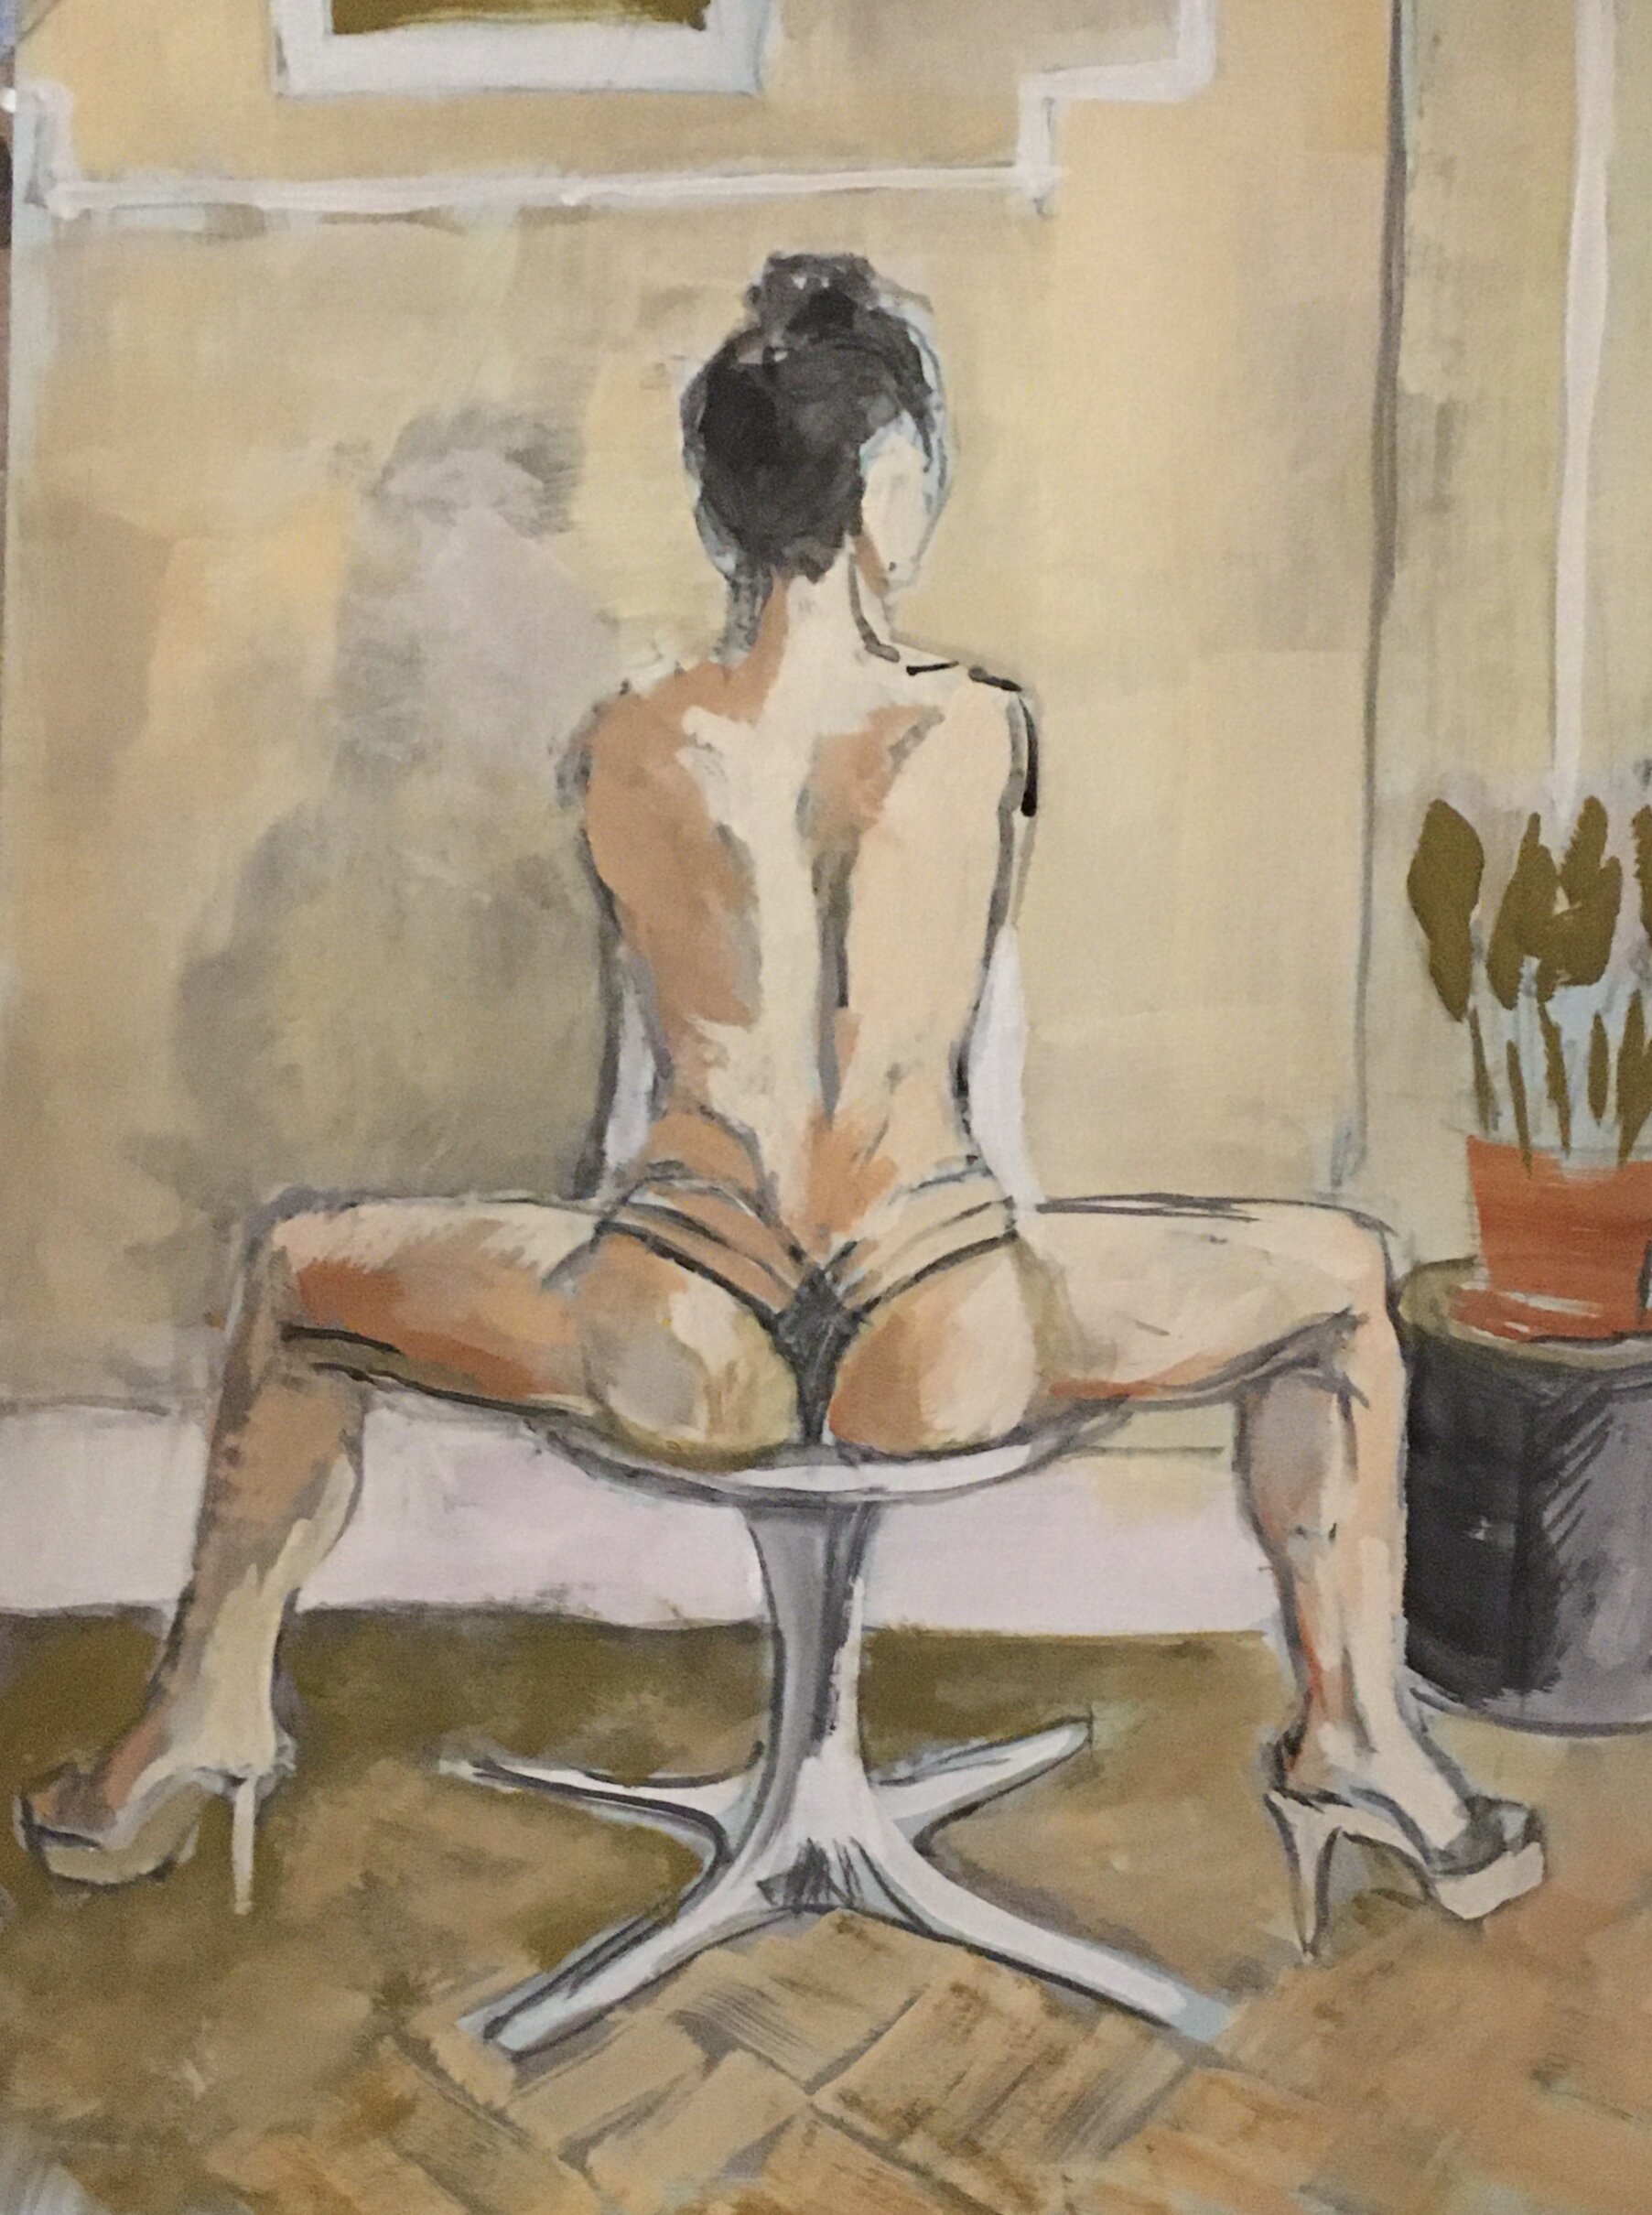 Kyla Seated Back Pose, Gouache, 9 by 12 inches, 2020.